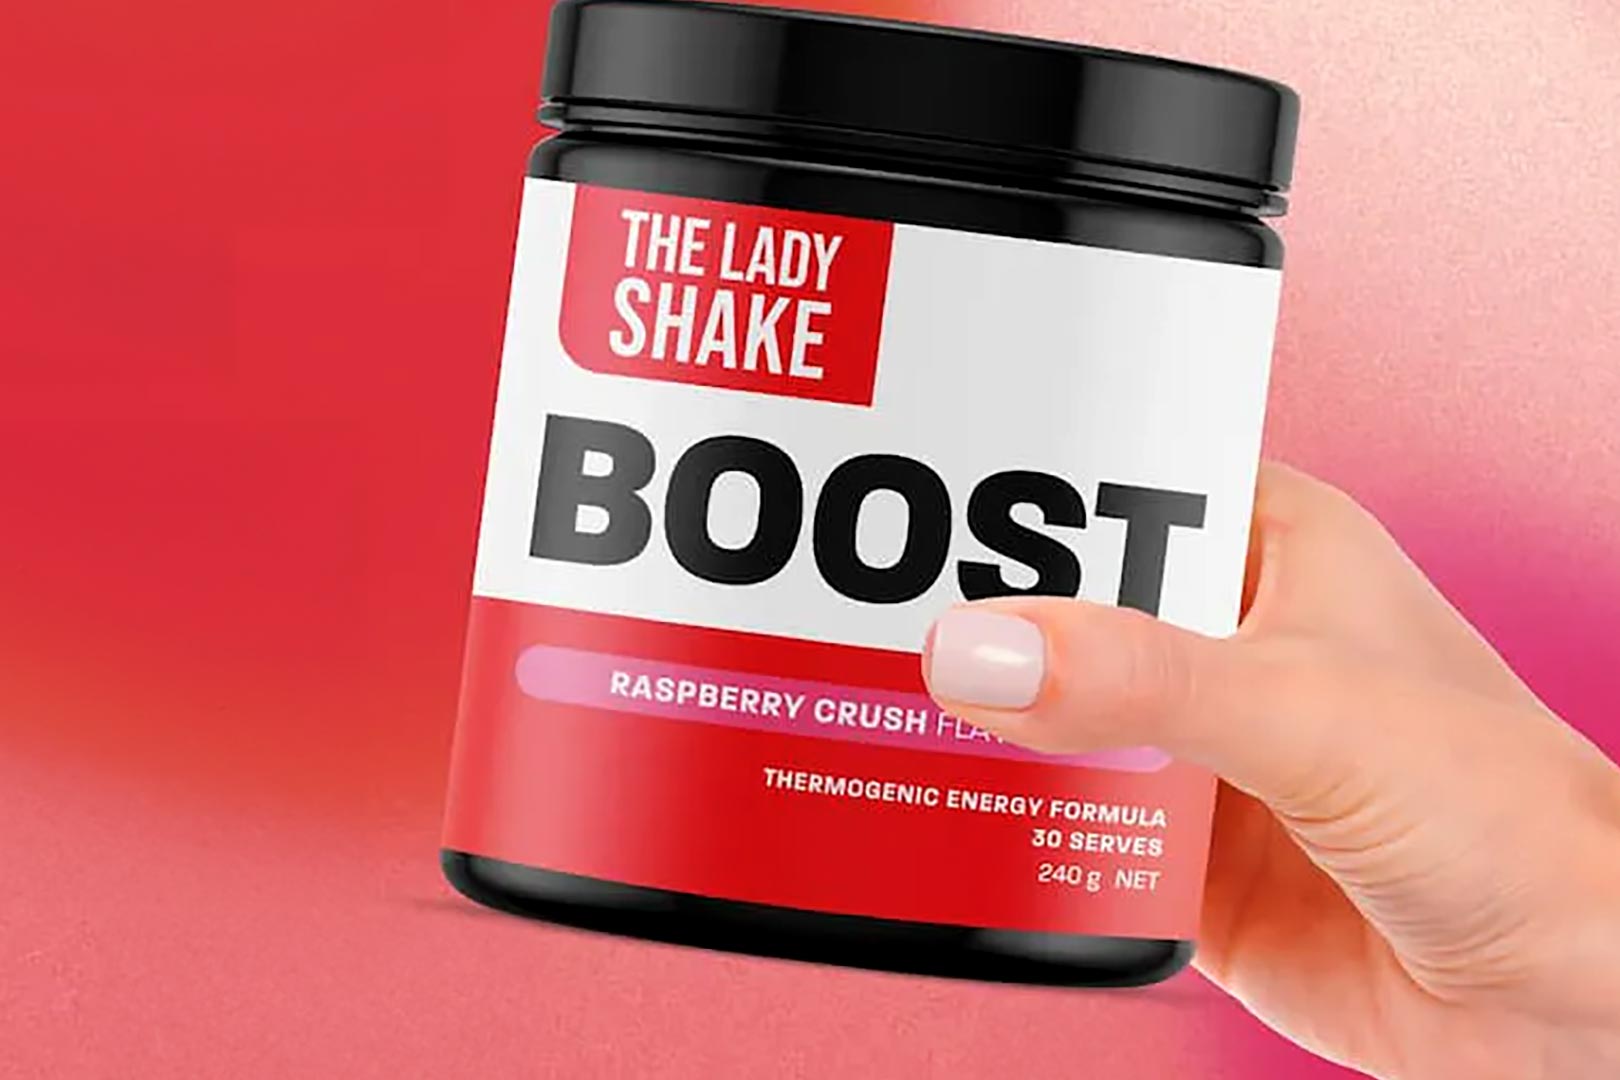 The Lady Shake Boost